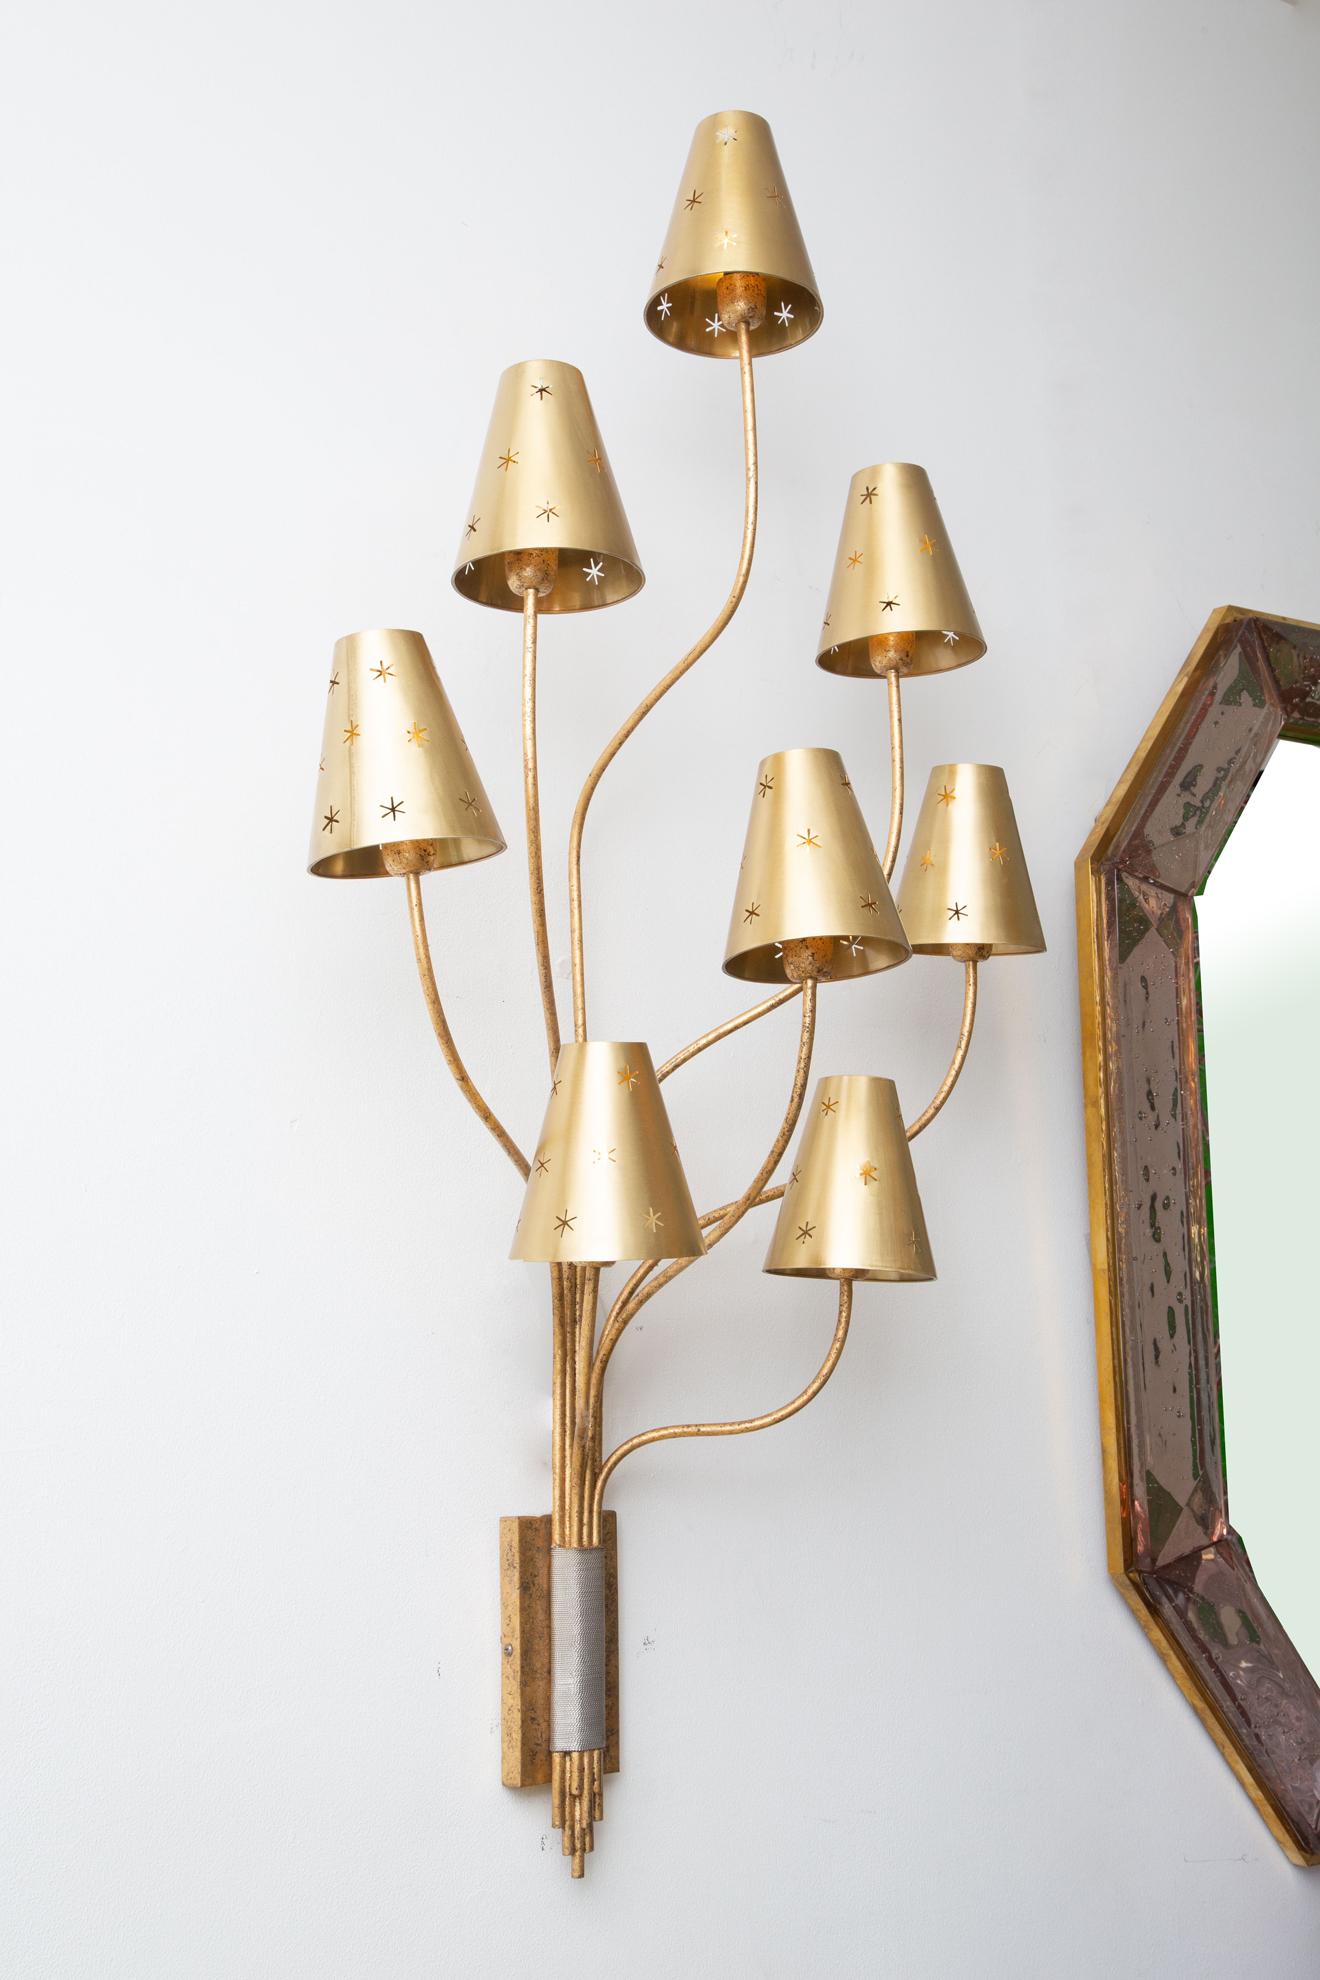 Large pair of 8 arms gilded metal wall sconces with brass perforated shades.